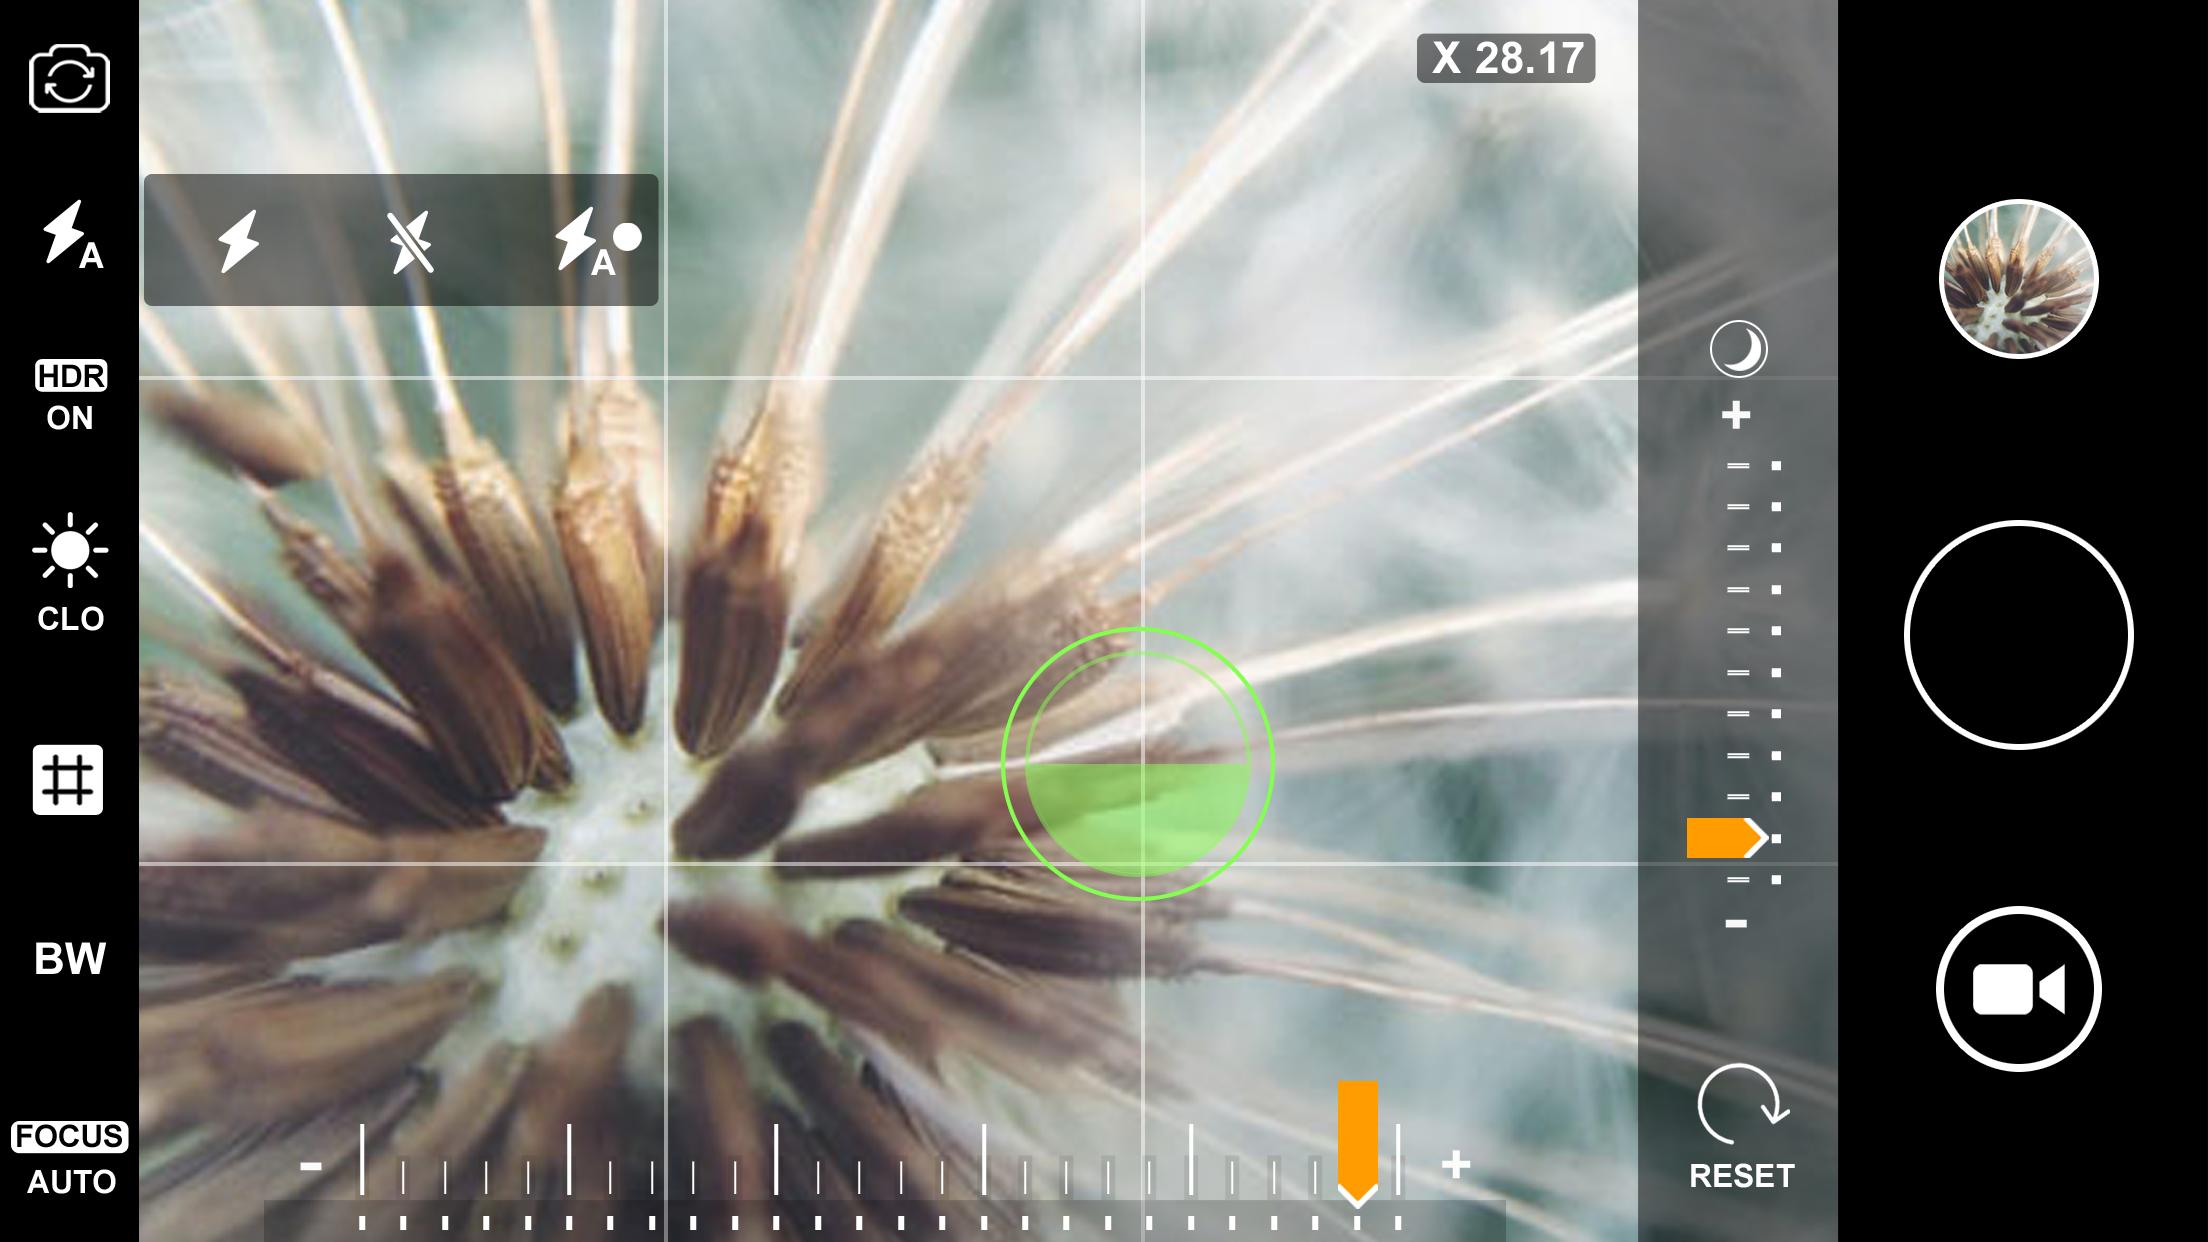 Macro Photography Camera Live 40x Zoom for Android - APK Download